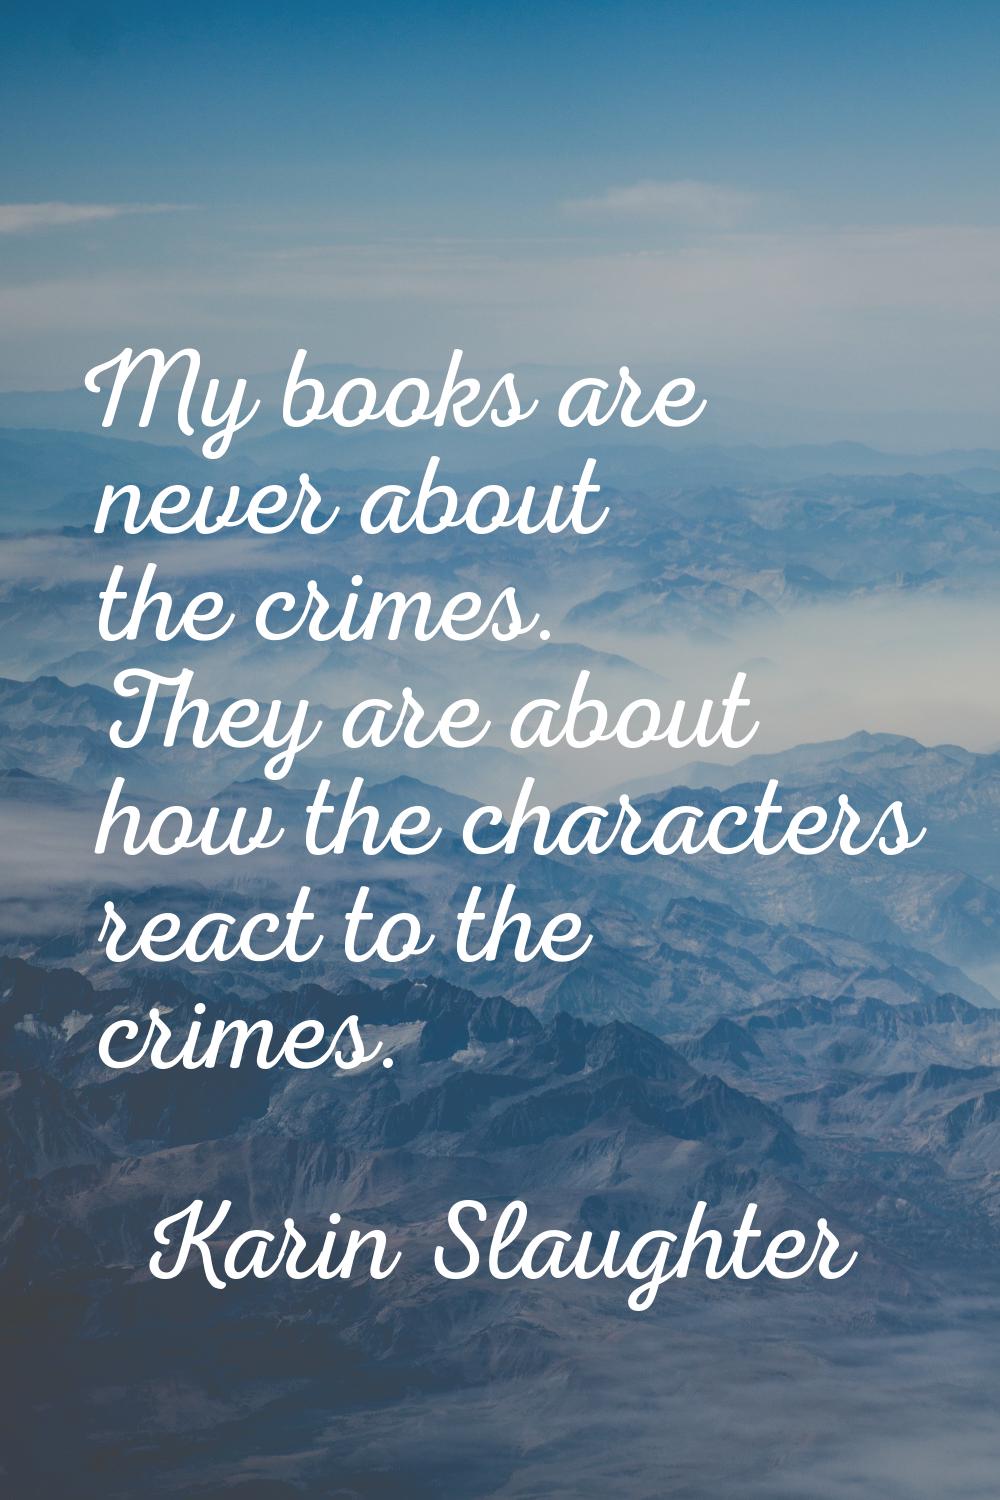 My books are never about the crimes. They are about how the characters react to the crimes.